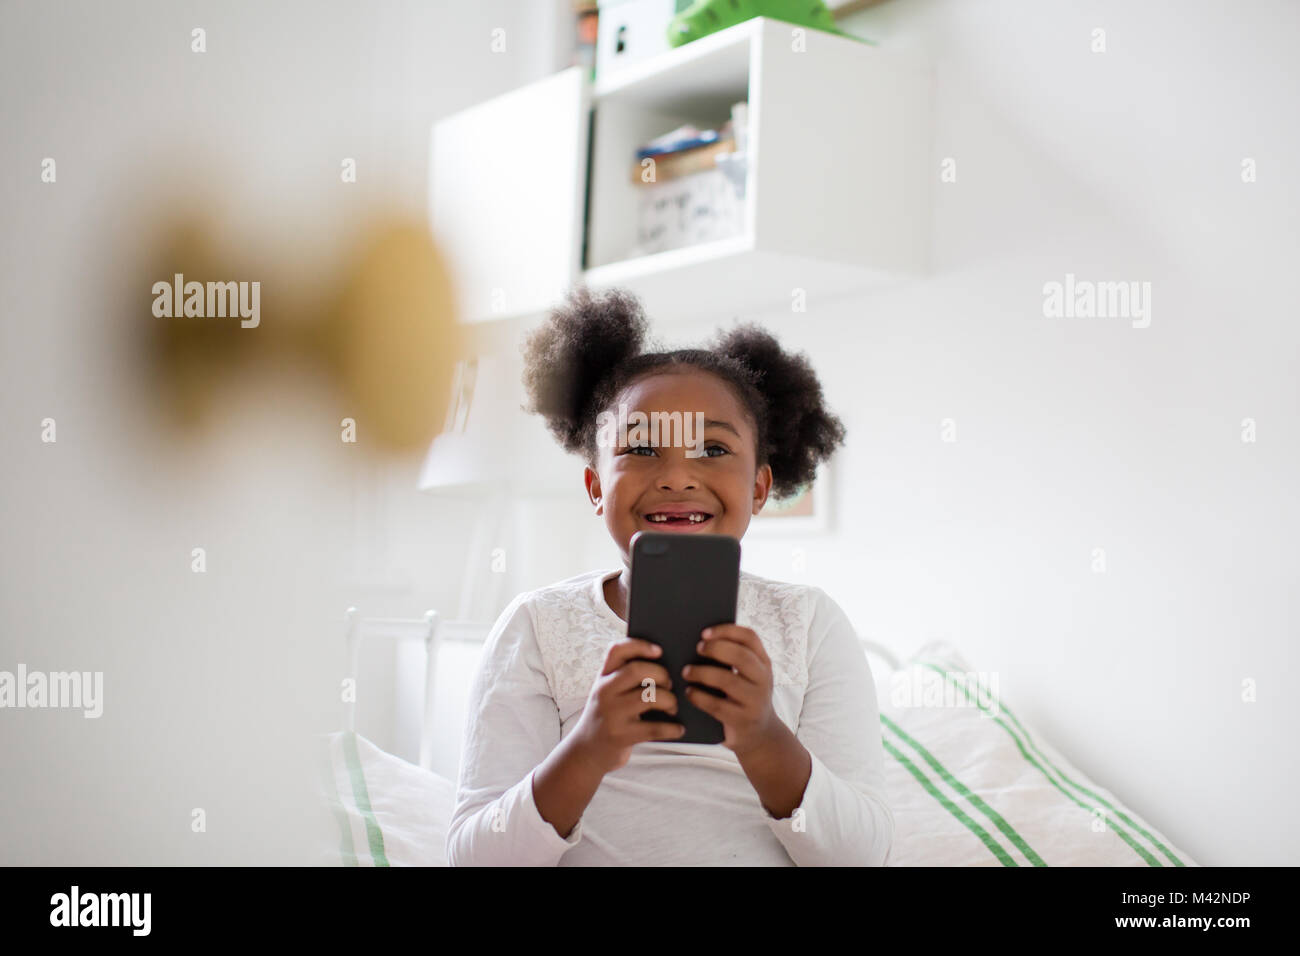 Girl Playing with smartphone dans sa chambre à coucher Banque D'Images